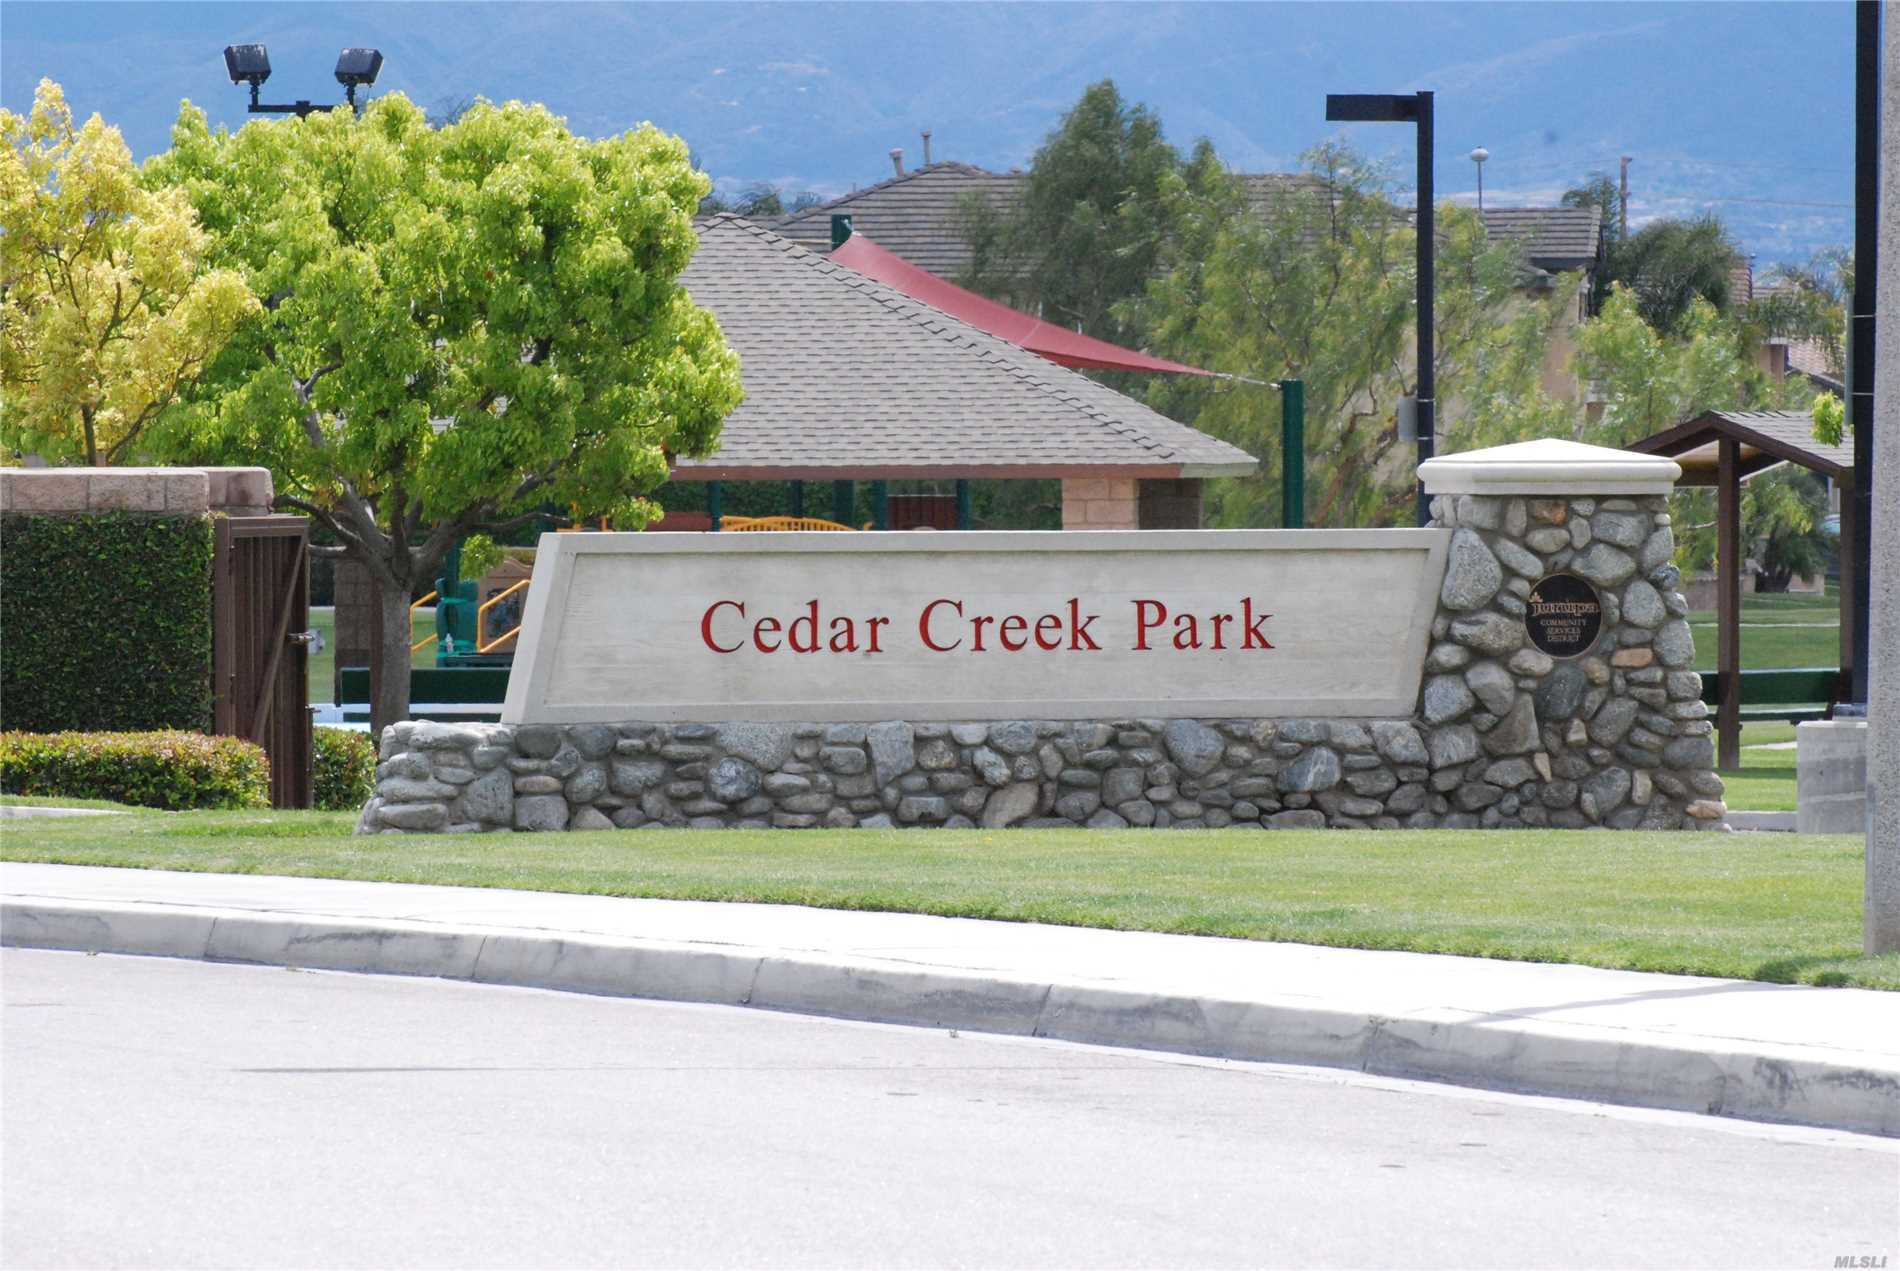 Sale May Be Subject To Term & Conditions Of An Offering Plan.  Age Requirement 62+  Maximum Income Requirement.  Adm Fee Of 2% Of Sales Price Required To The Toh. $53.00 Assessment Payed Over 3 Years Coming Up. Spotless And Spacious 2nd Floor Unit. Beautiful Development. Low Maintenance. Enjoy The Lovely Cedar Creek Park Which Is Just Minutes Away. Conveniently Located To The Seaford Oyster Bay Expressway.